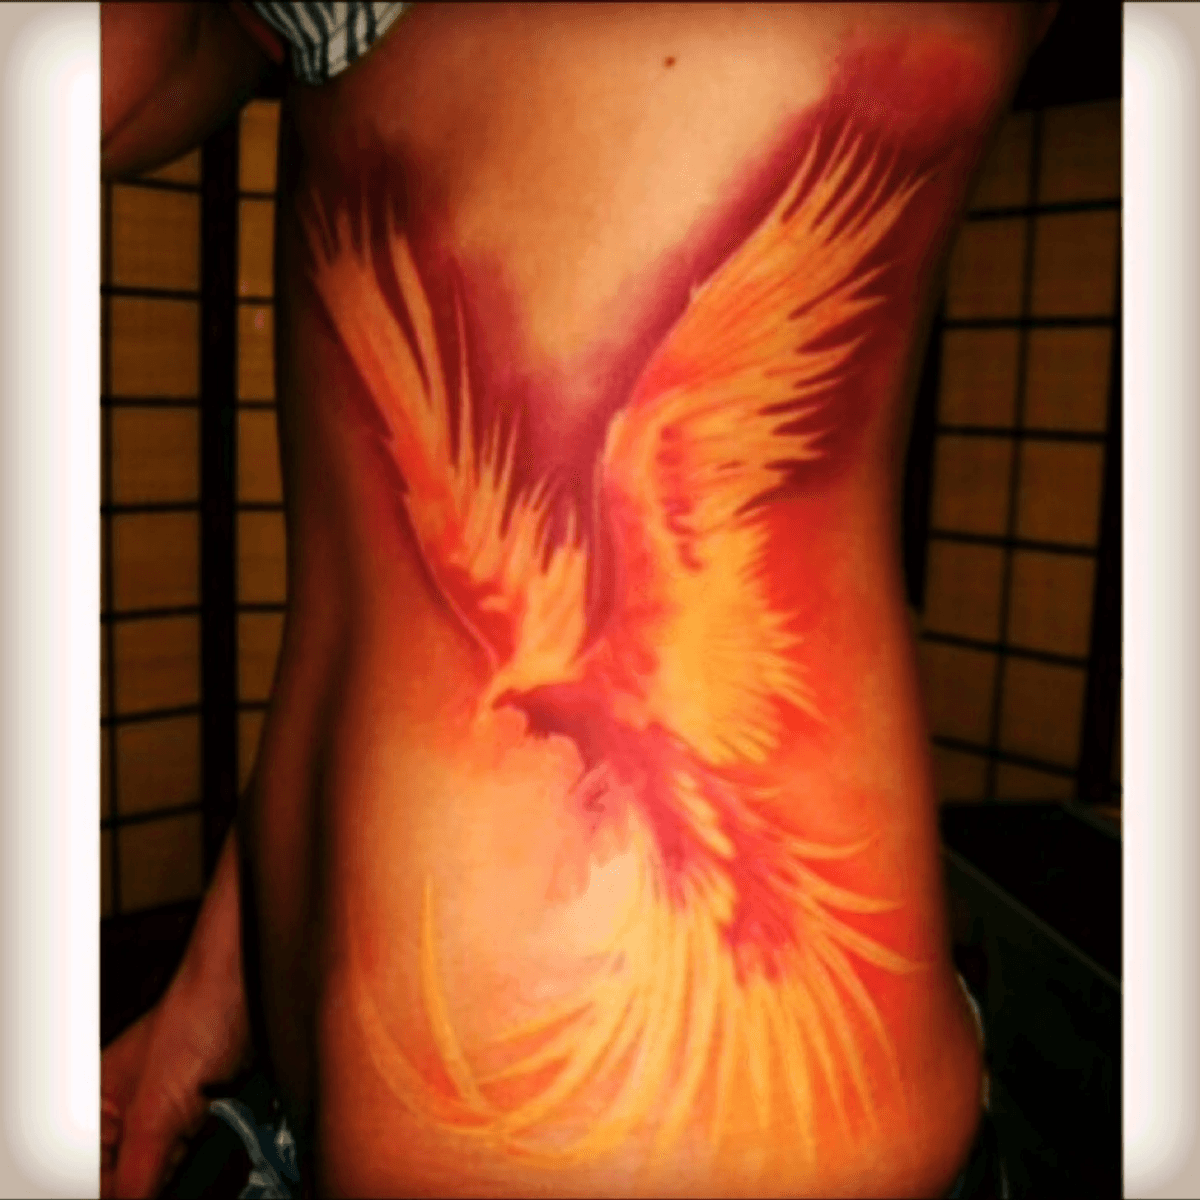 phoenix rising from flame tattoos